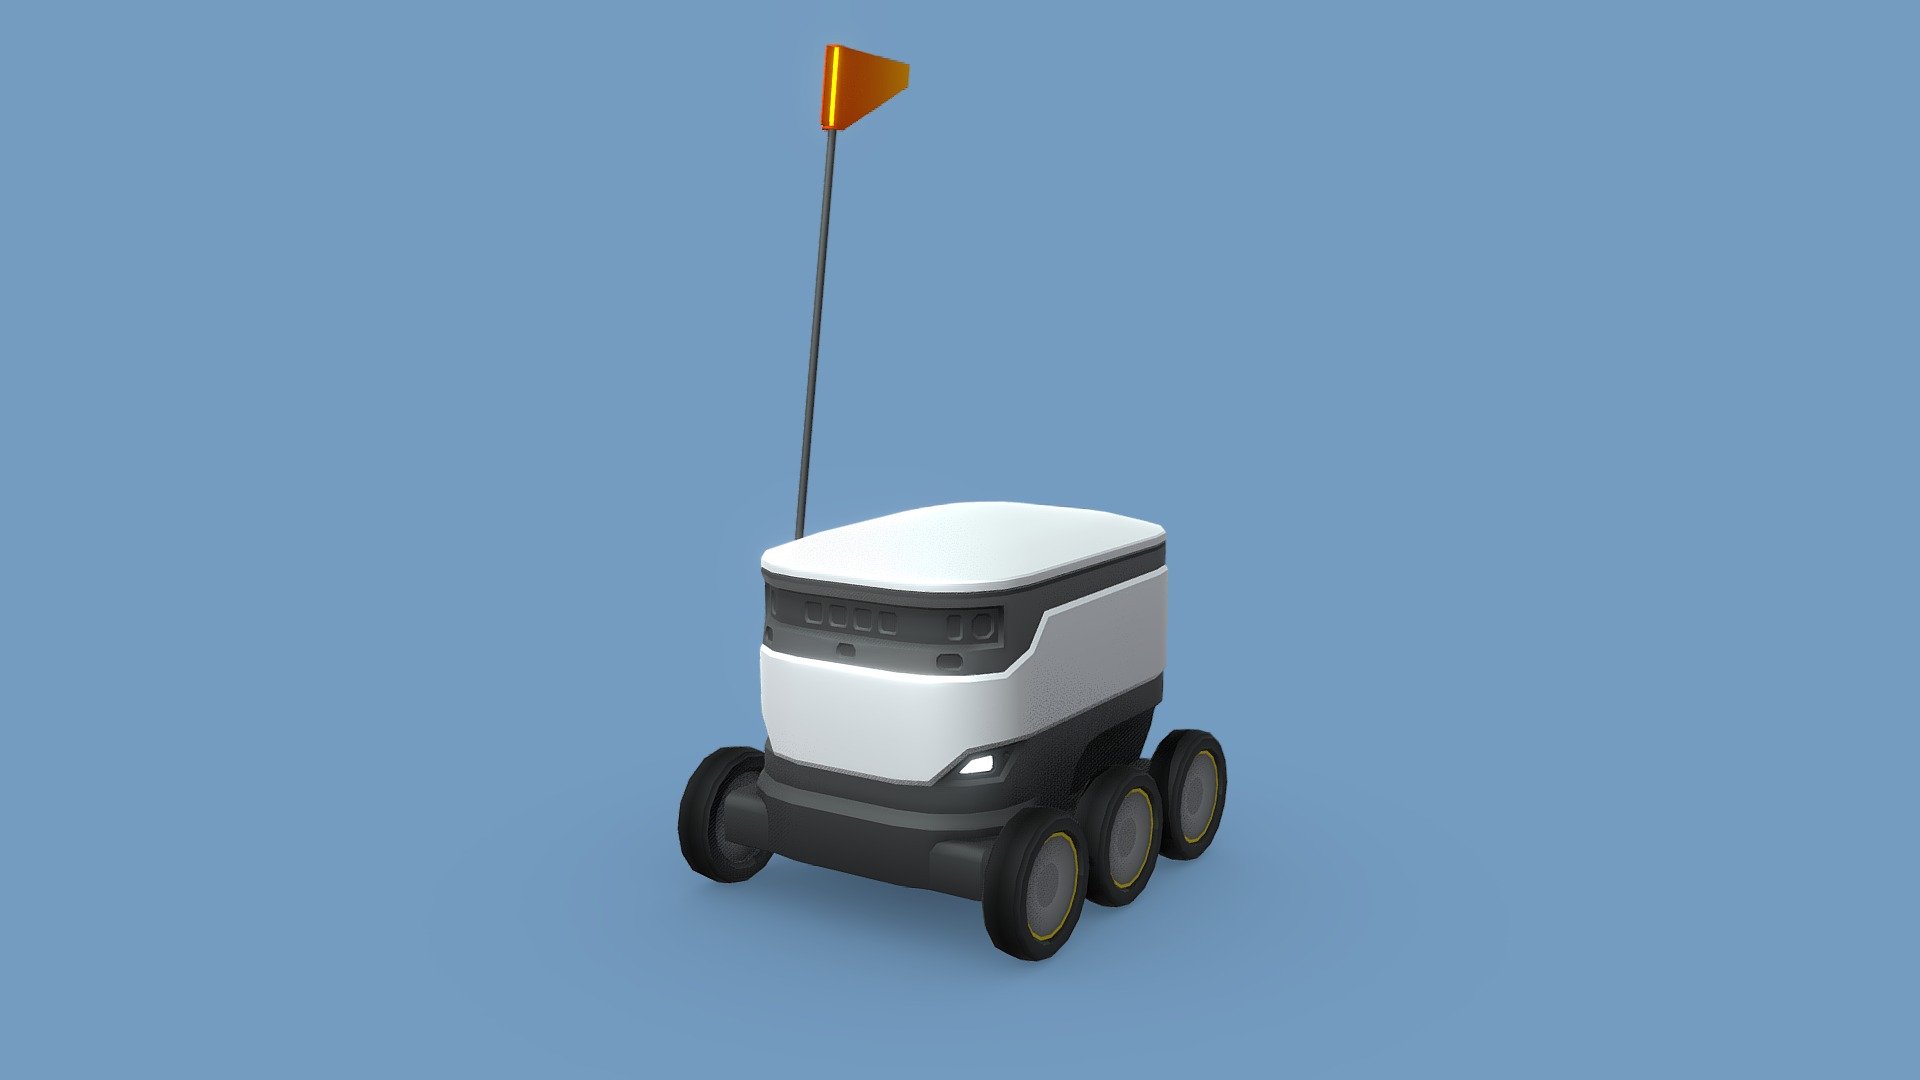 This low poly 3D asset of a delivery robot is ready to use. With its sleek, minimalist design and compact size similar to a cooler, it is ideal for use in games or simulations that involve logistics, transportation, or futuristic technology.

It uses a gradient palette texture atlas or trim sheet for texturing, allowing for high-quality textures without sacrificing performance 3d model